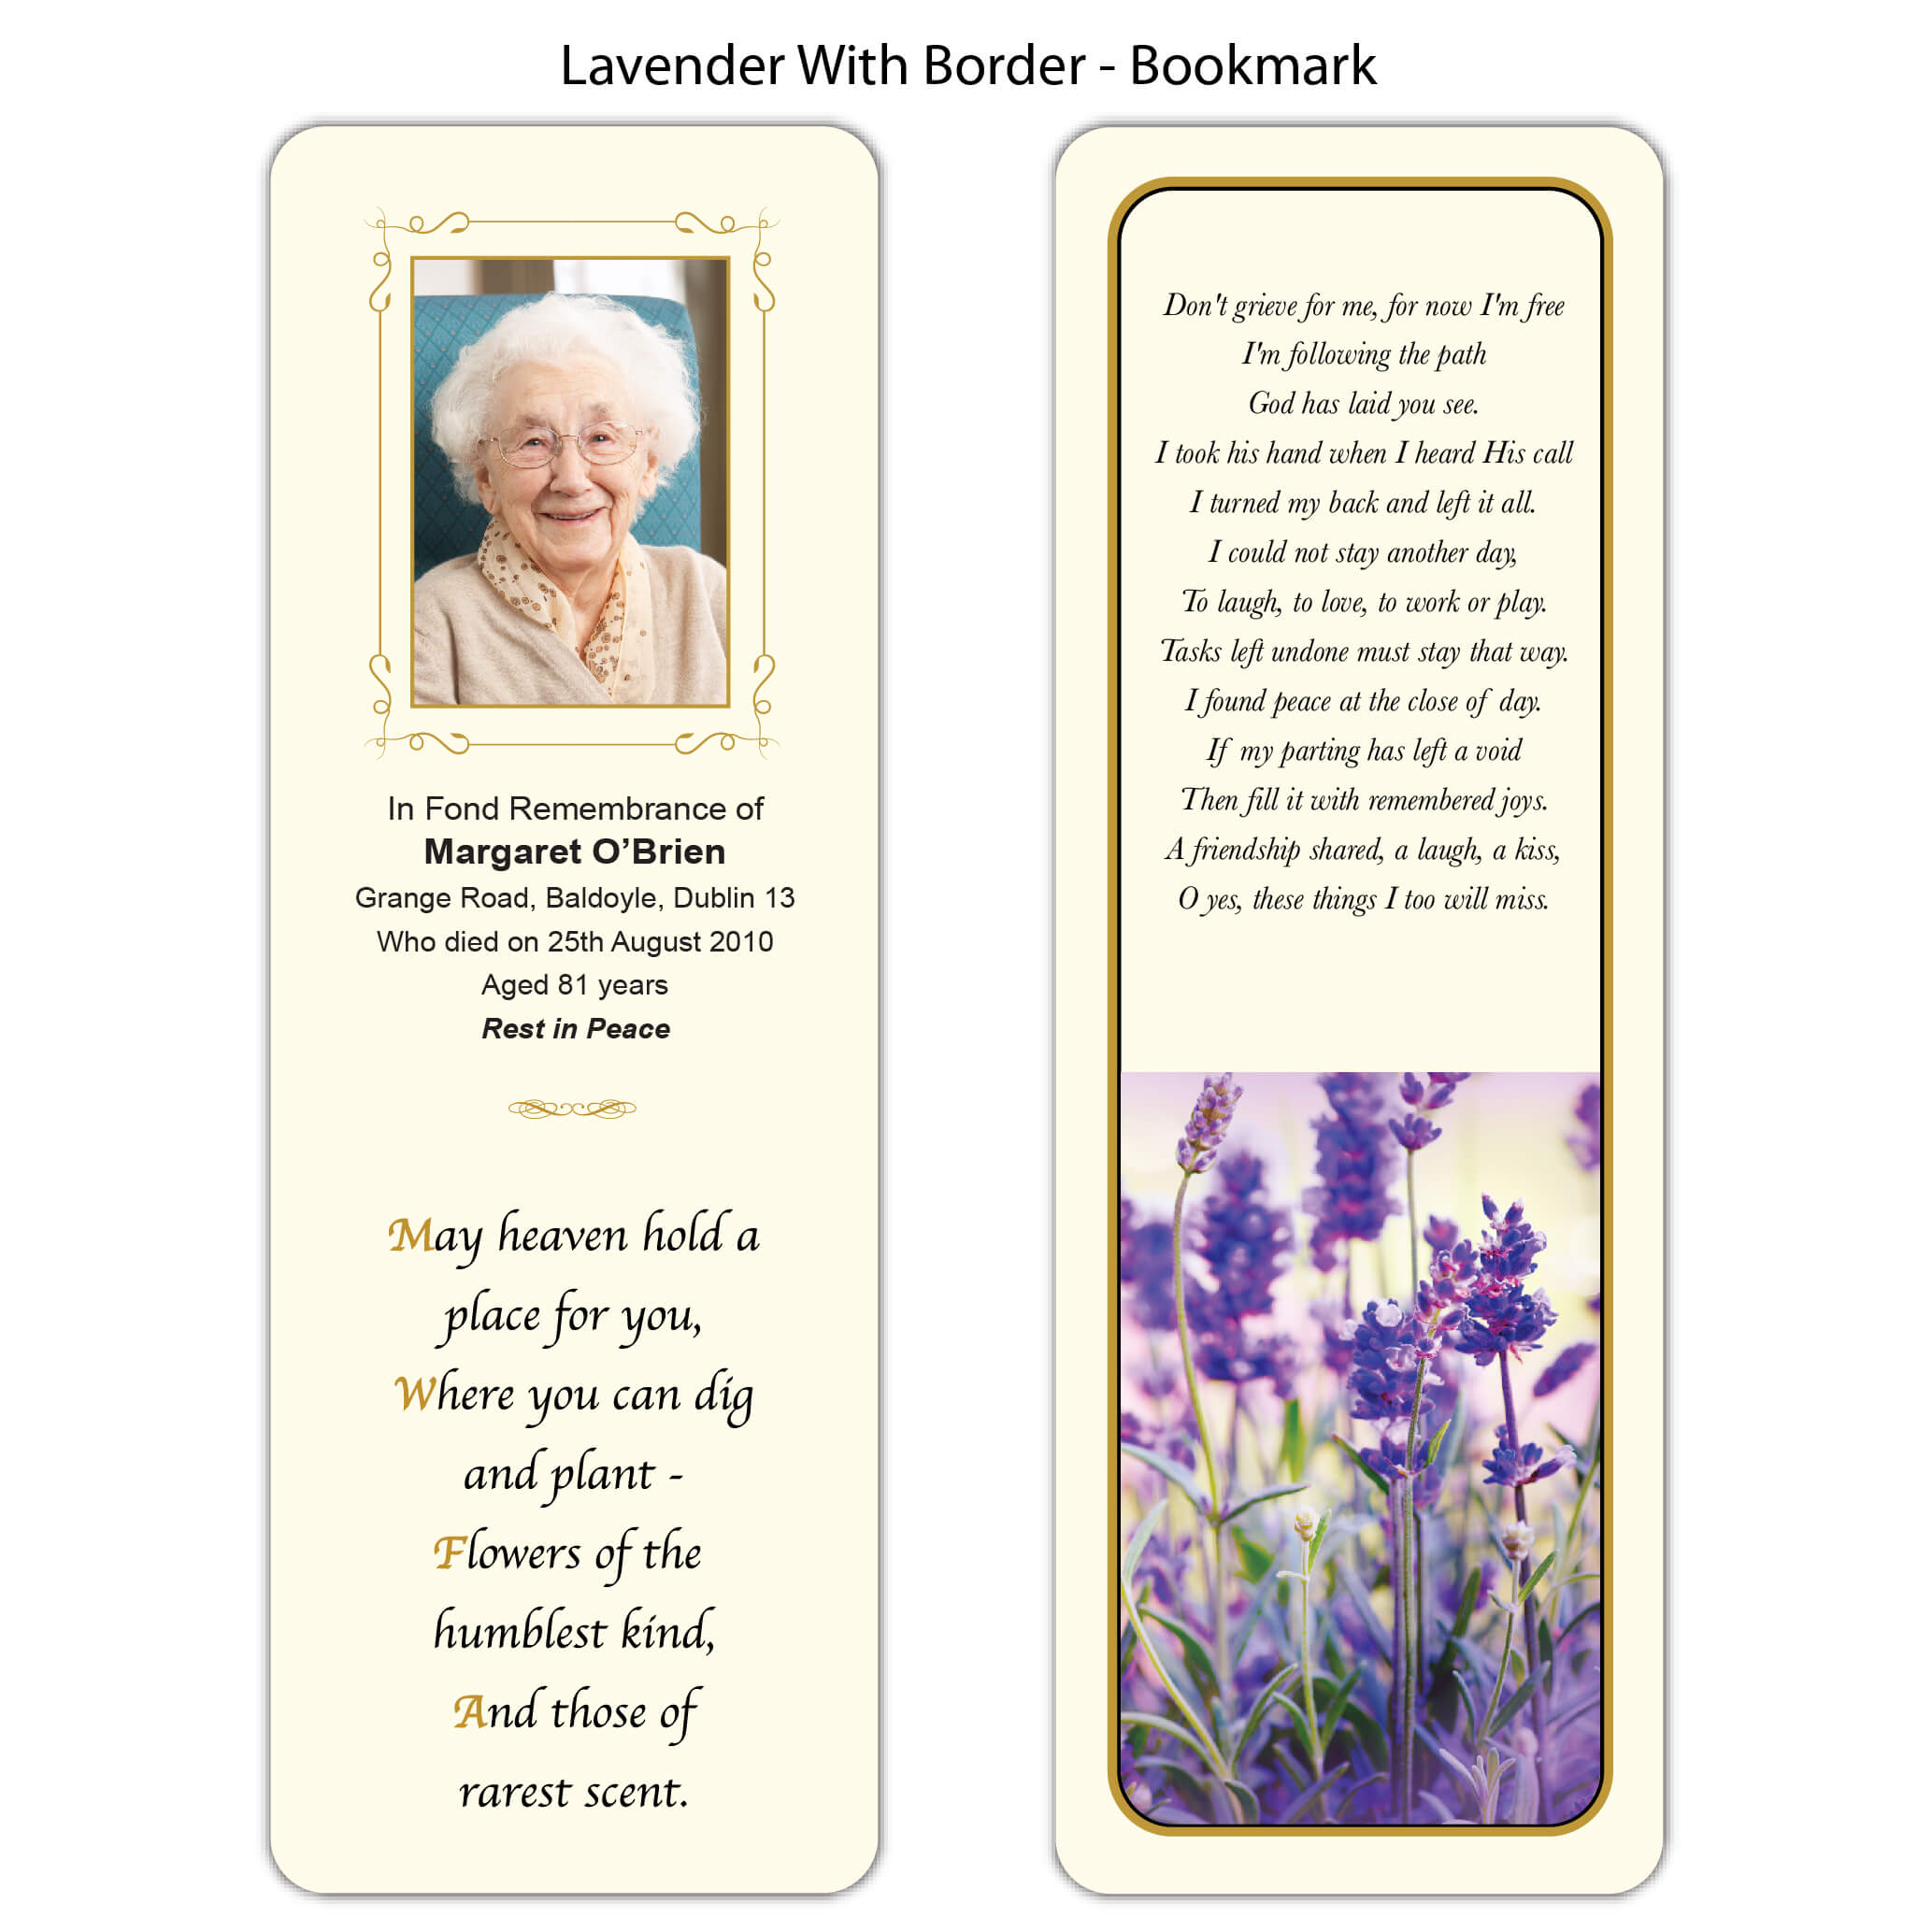 Lavender with Border Bookmarks